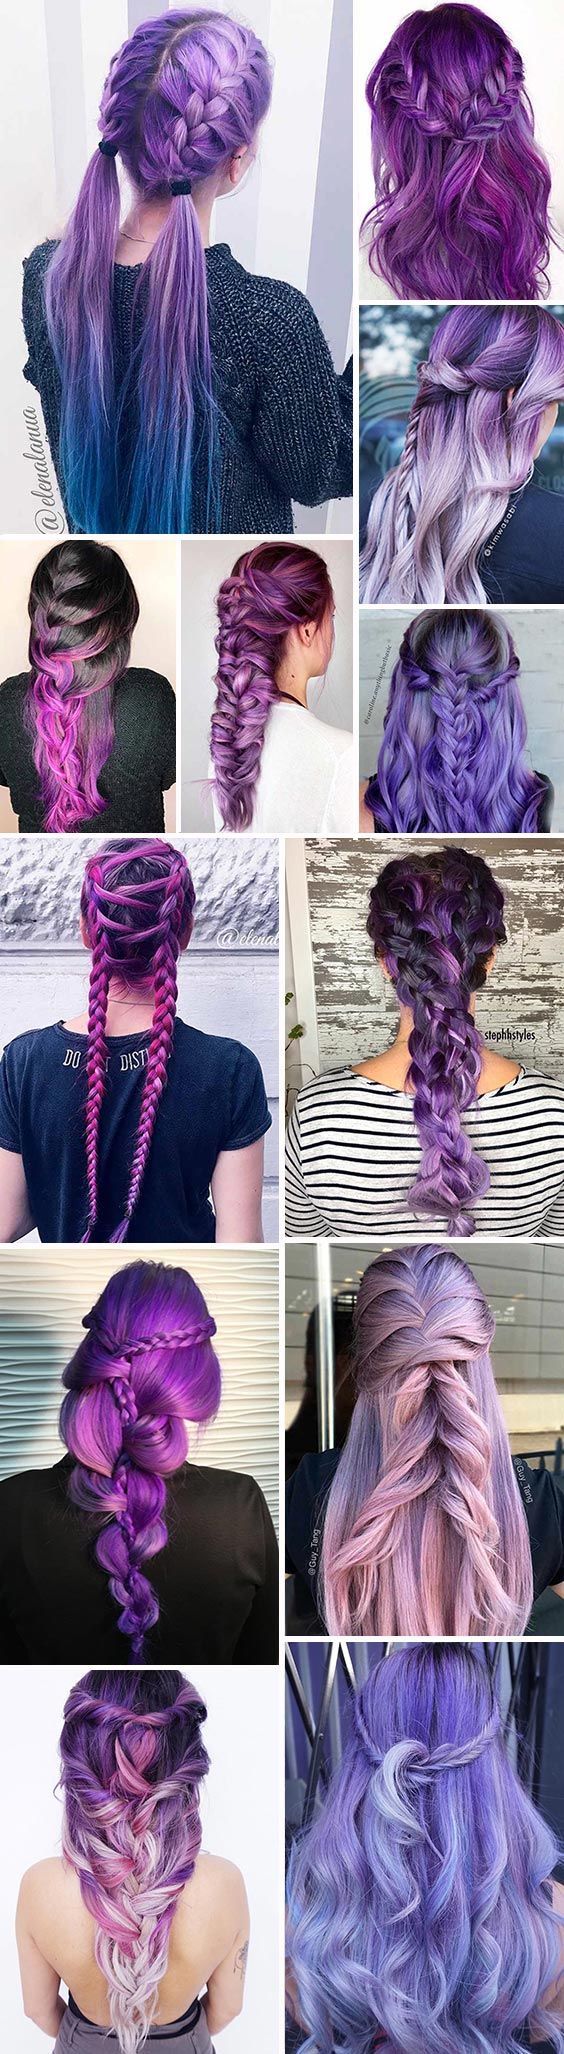 24 Inspirational Ideas To Braid Your Purple Hair